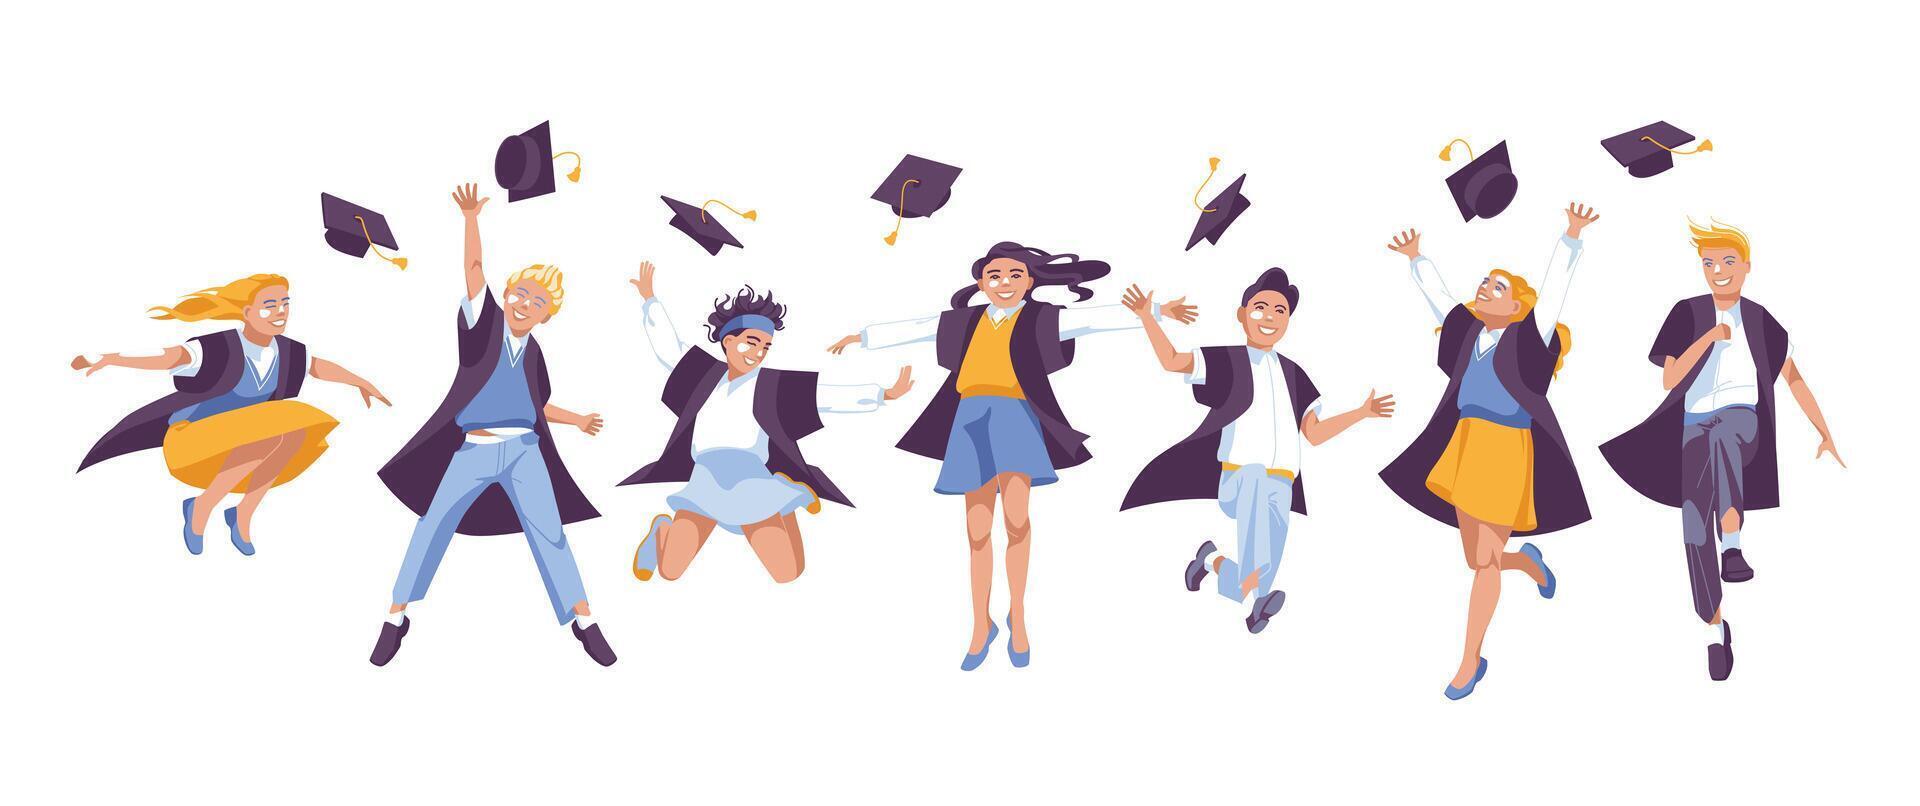 A group of graduates jump together. Children. Happiness. Diploma. flat illustration vector